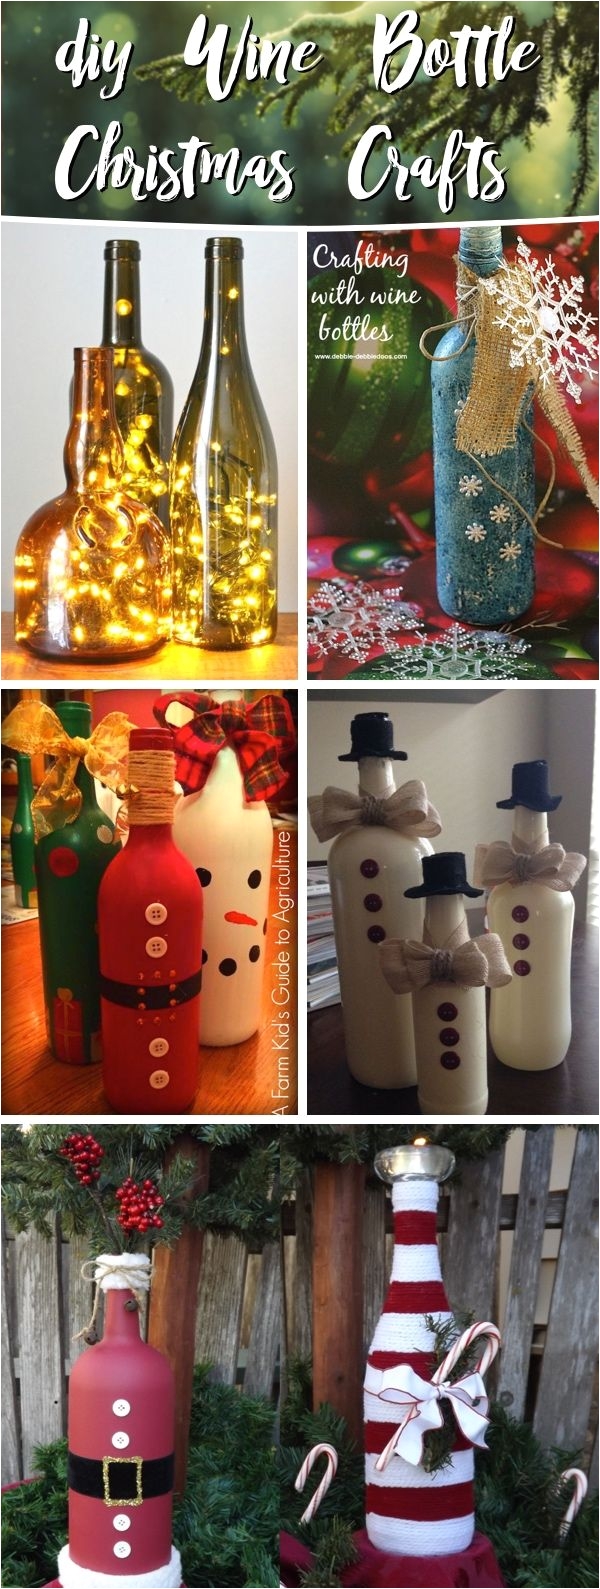 20 wine bottle christmas crafts to go for a festive decor blended with some upcycling